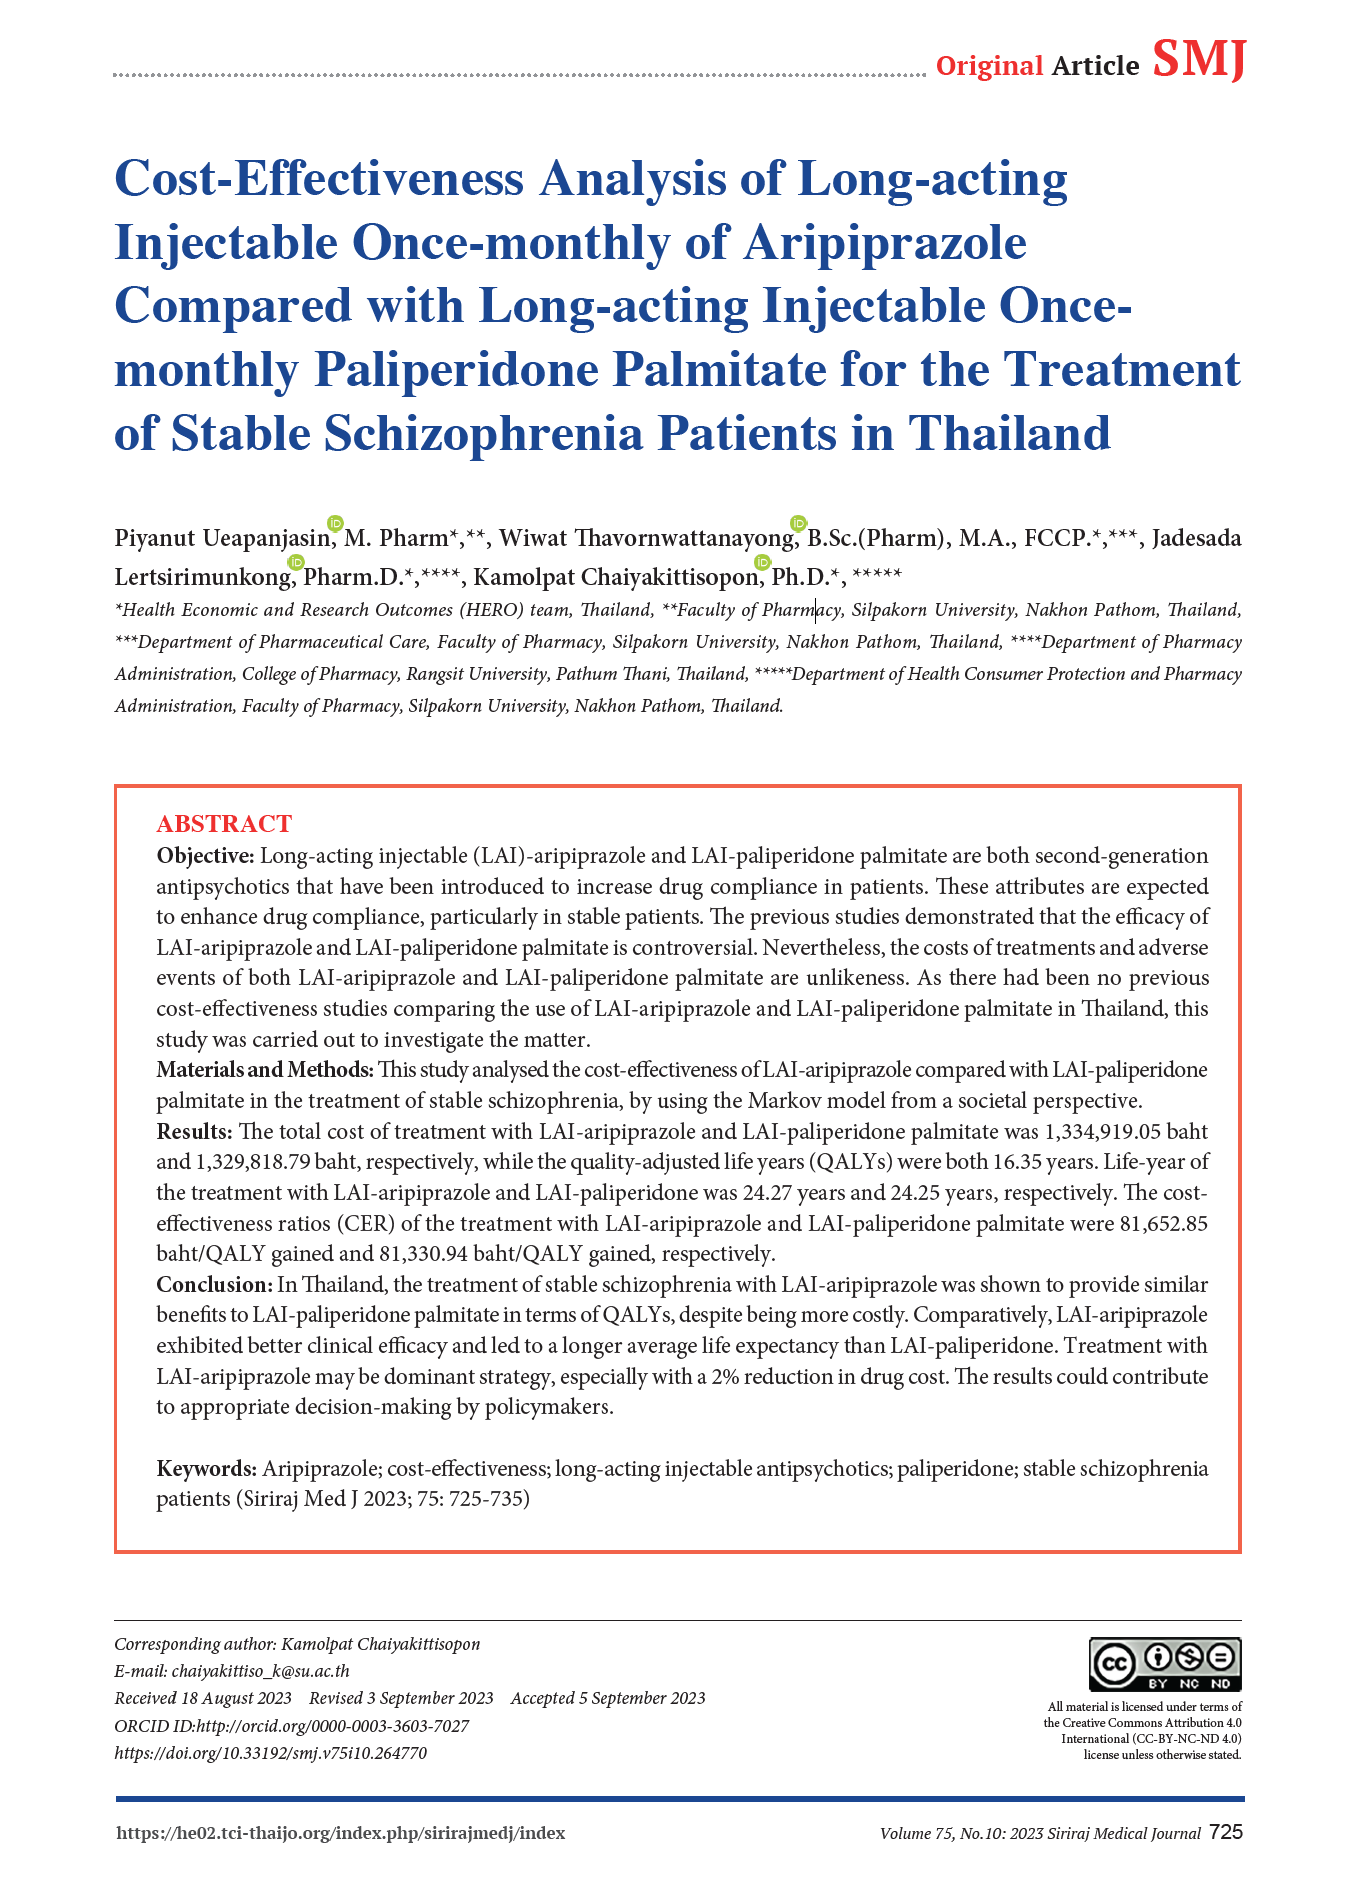 Cost-Effectiveness Analysis of Long-acting Injectable Once-monthly of Aripiprazole